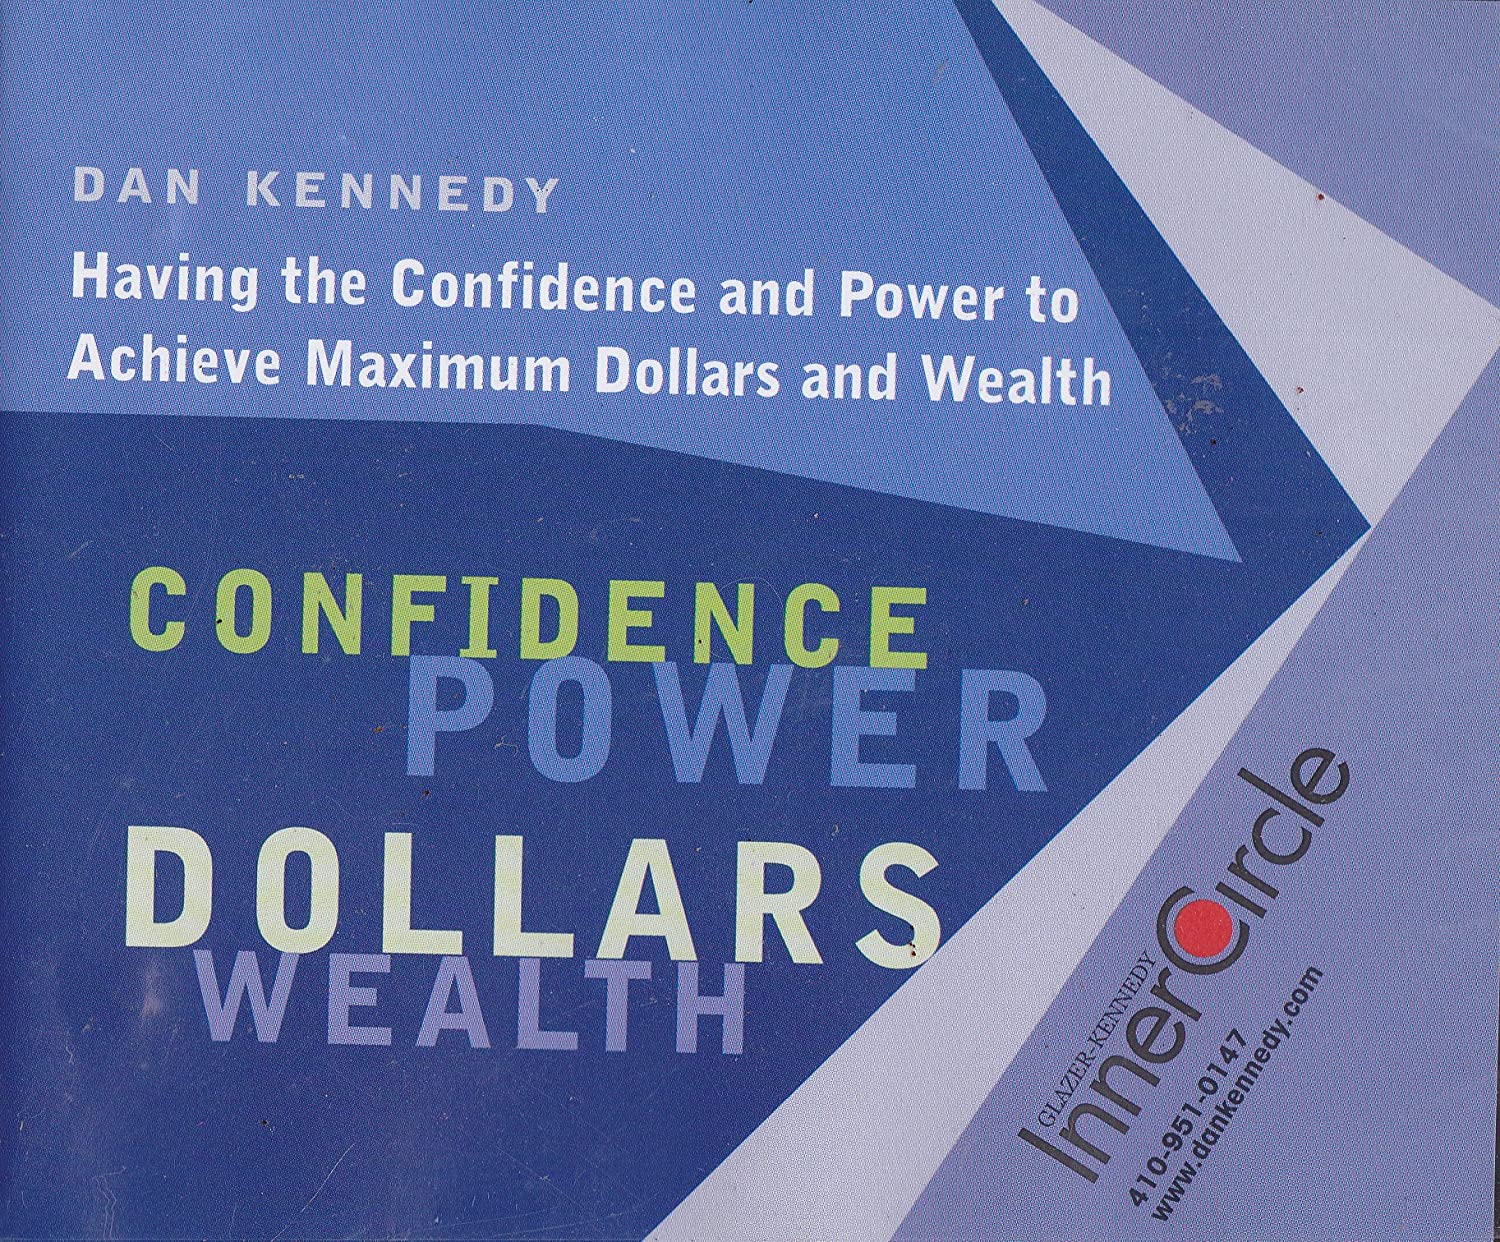 Dan Kennedy - Having the Confidence and Power to Achieve Maximum Dollars and Wealth